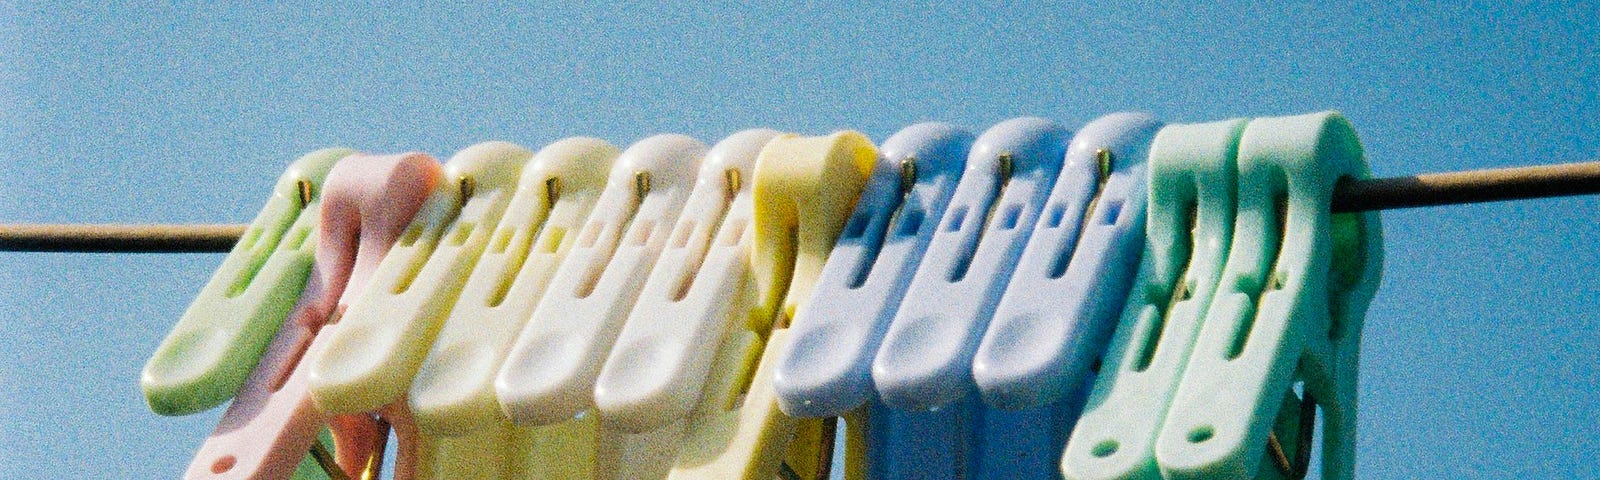 A close-up of a bunch of pastel-colored laundry clips on a clothesline against a bright blue sky.